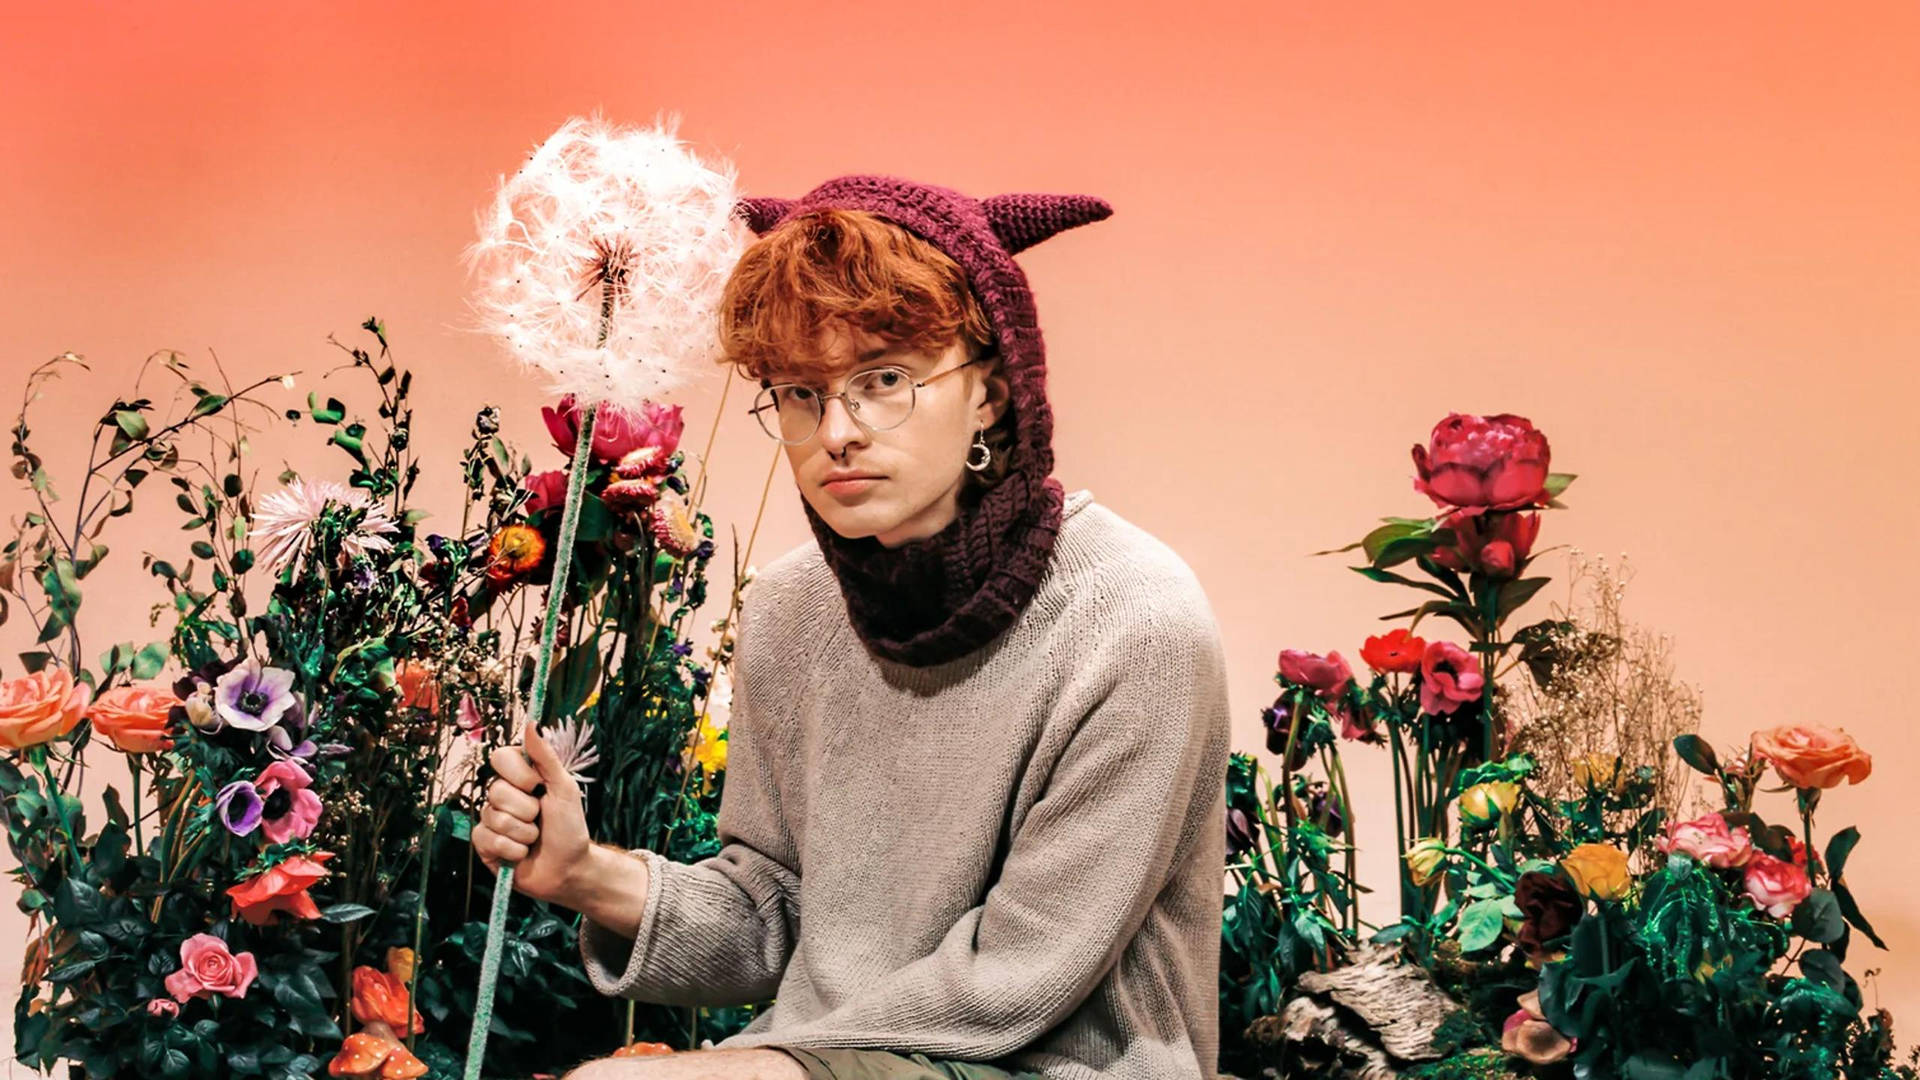 A Man With Red Hair Sitting On A Flower Bed Wallpaper